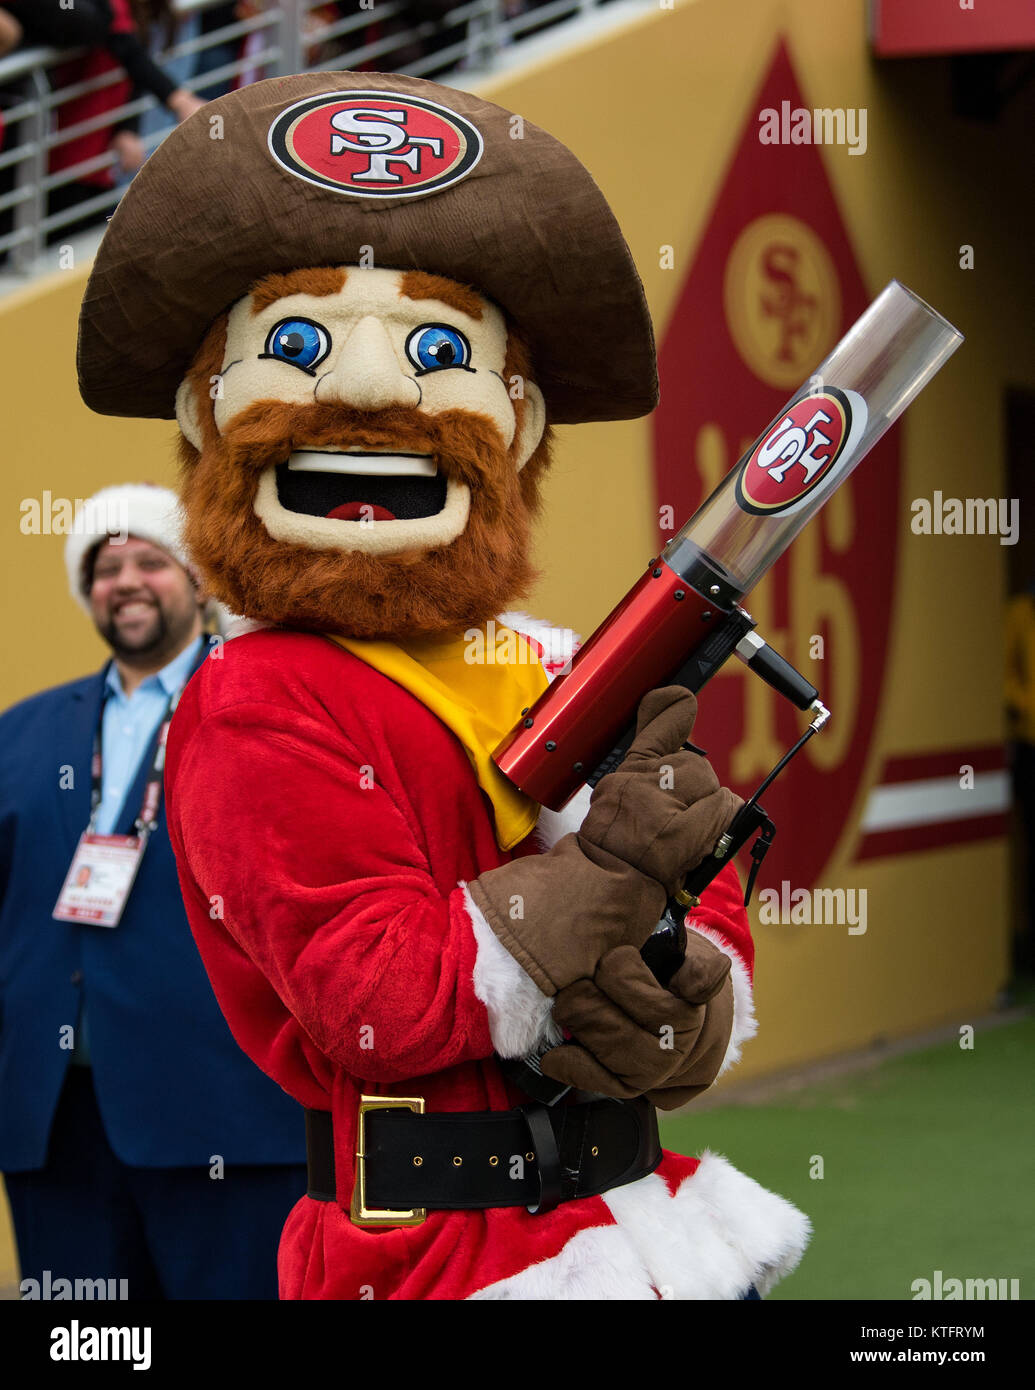 Santa Clara, California, USA. 24th Dec, 2017. The 49ers mascot, Sourdough  Sam, entertains the fans, during a NFL game between the Jacksonville  Jaguars and the San Francisco 49ers at the Levi's Stadium